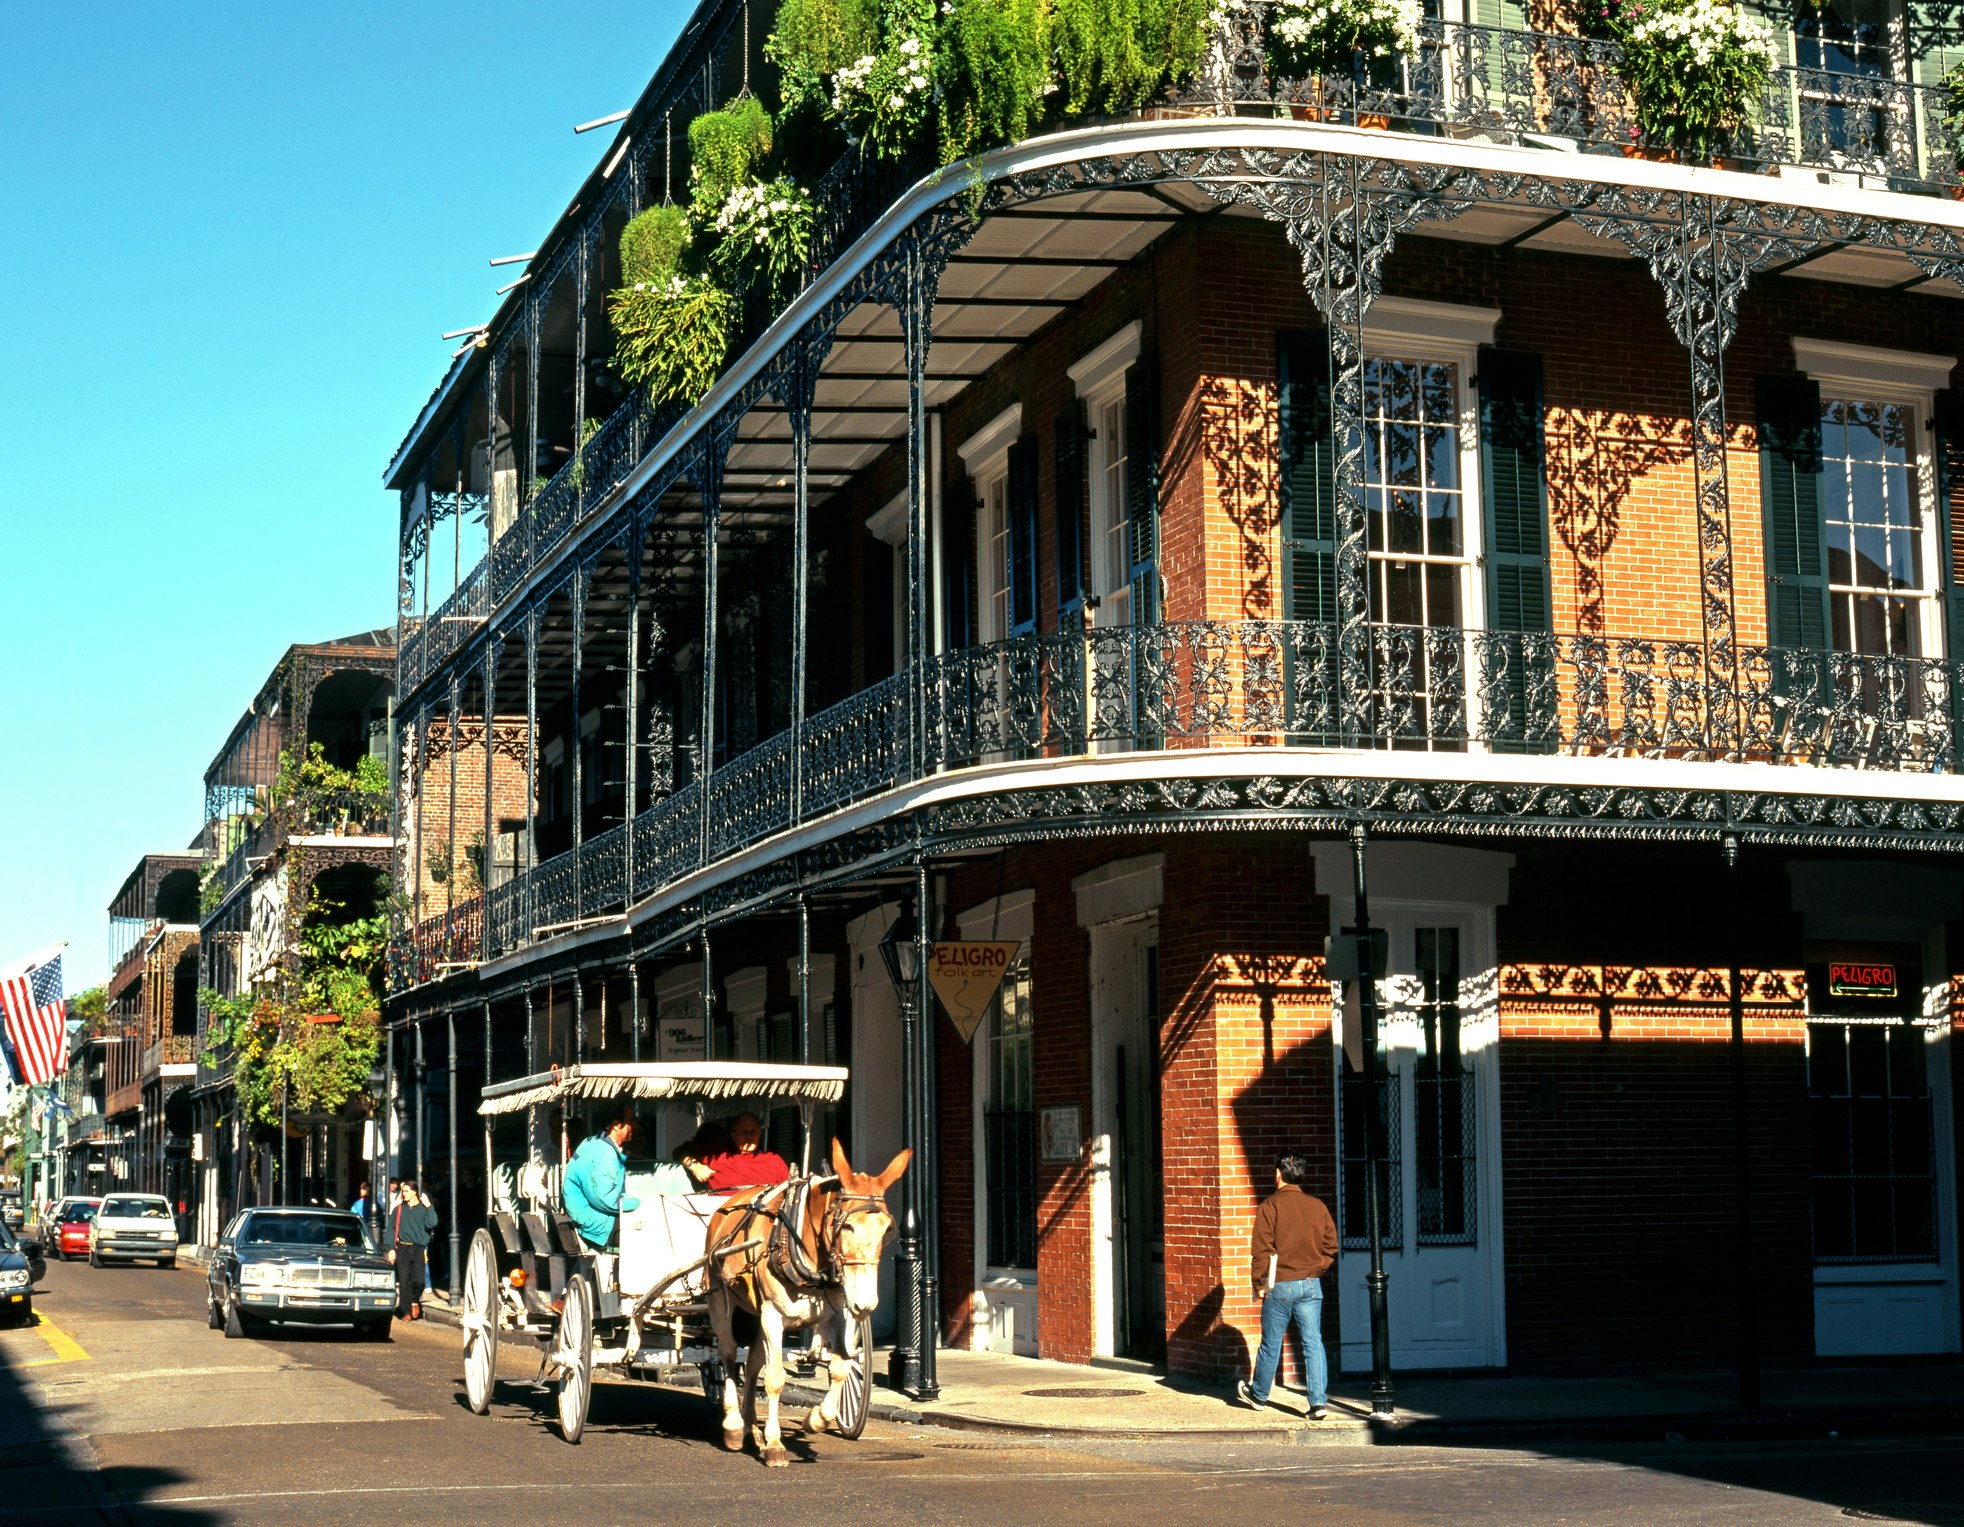 A horse-drawn carriage passes a corner building with an intricate wrought-iron wrap-around balcony